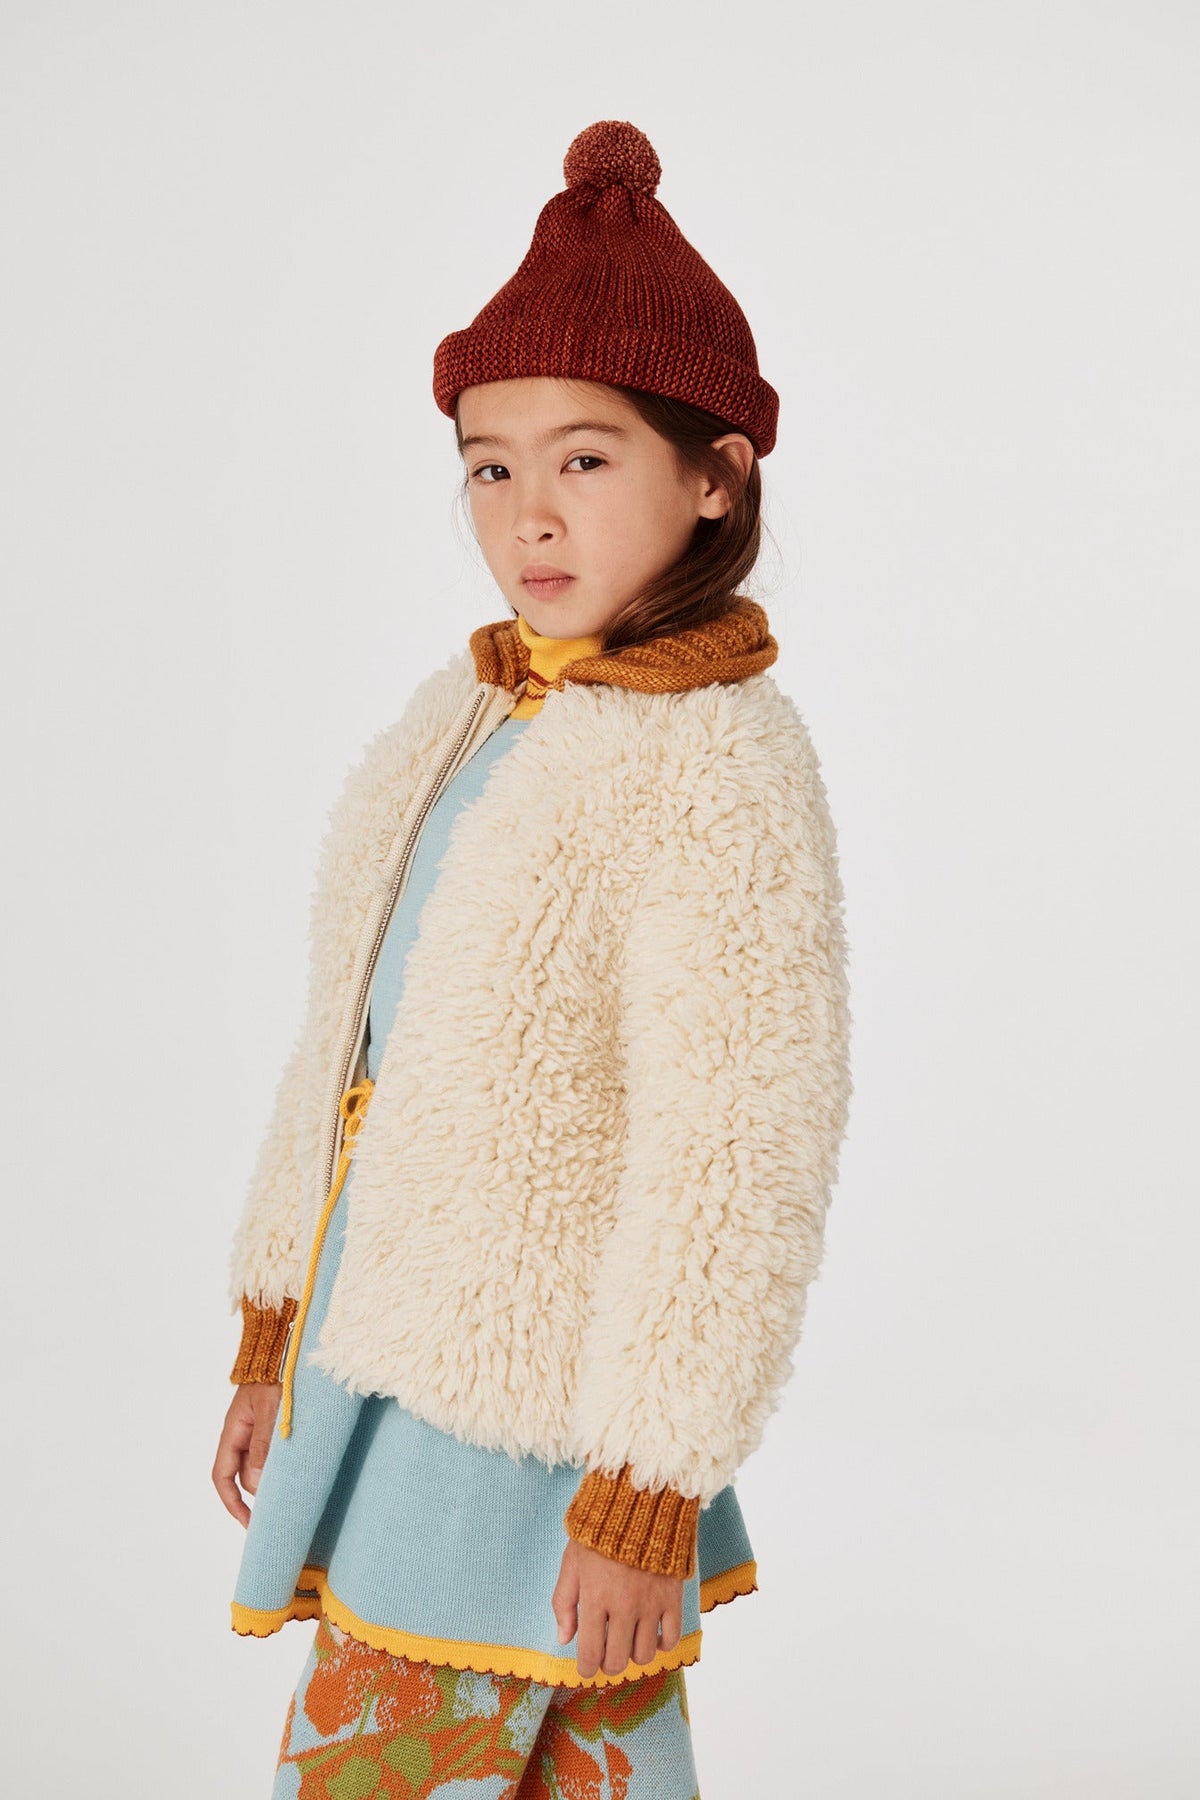 Eco Wool Fur Cardigan - Winter White+Model is 48 inches tall, 47lbs, wearing a size 4-5y